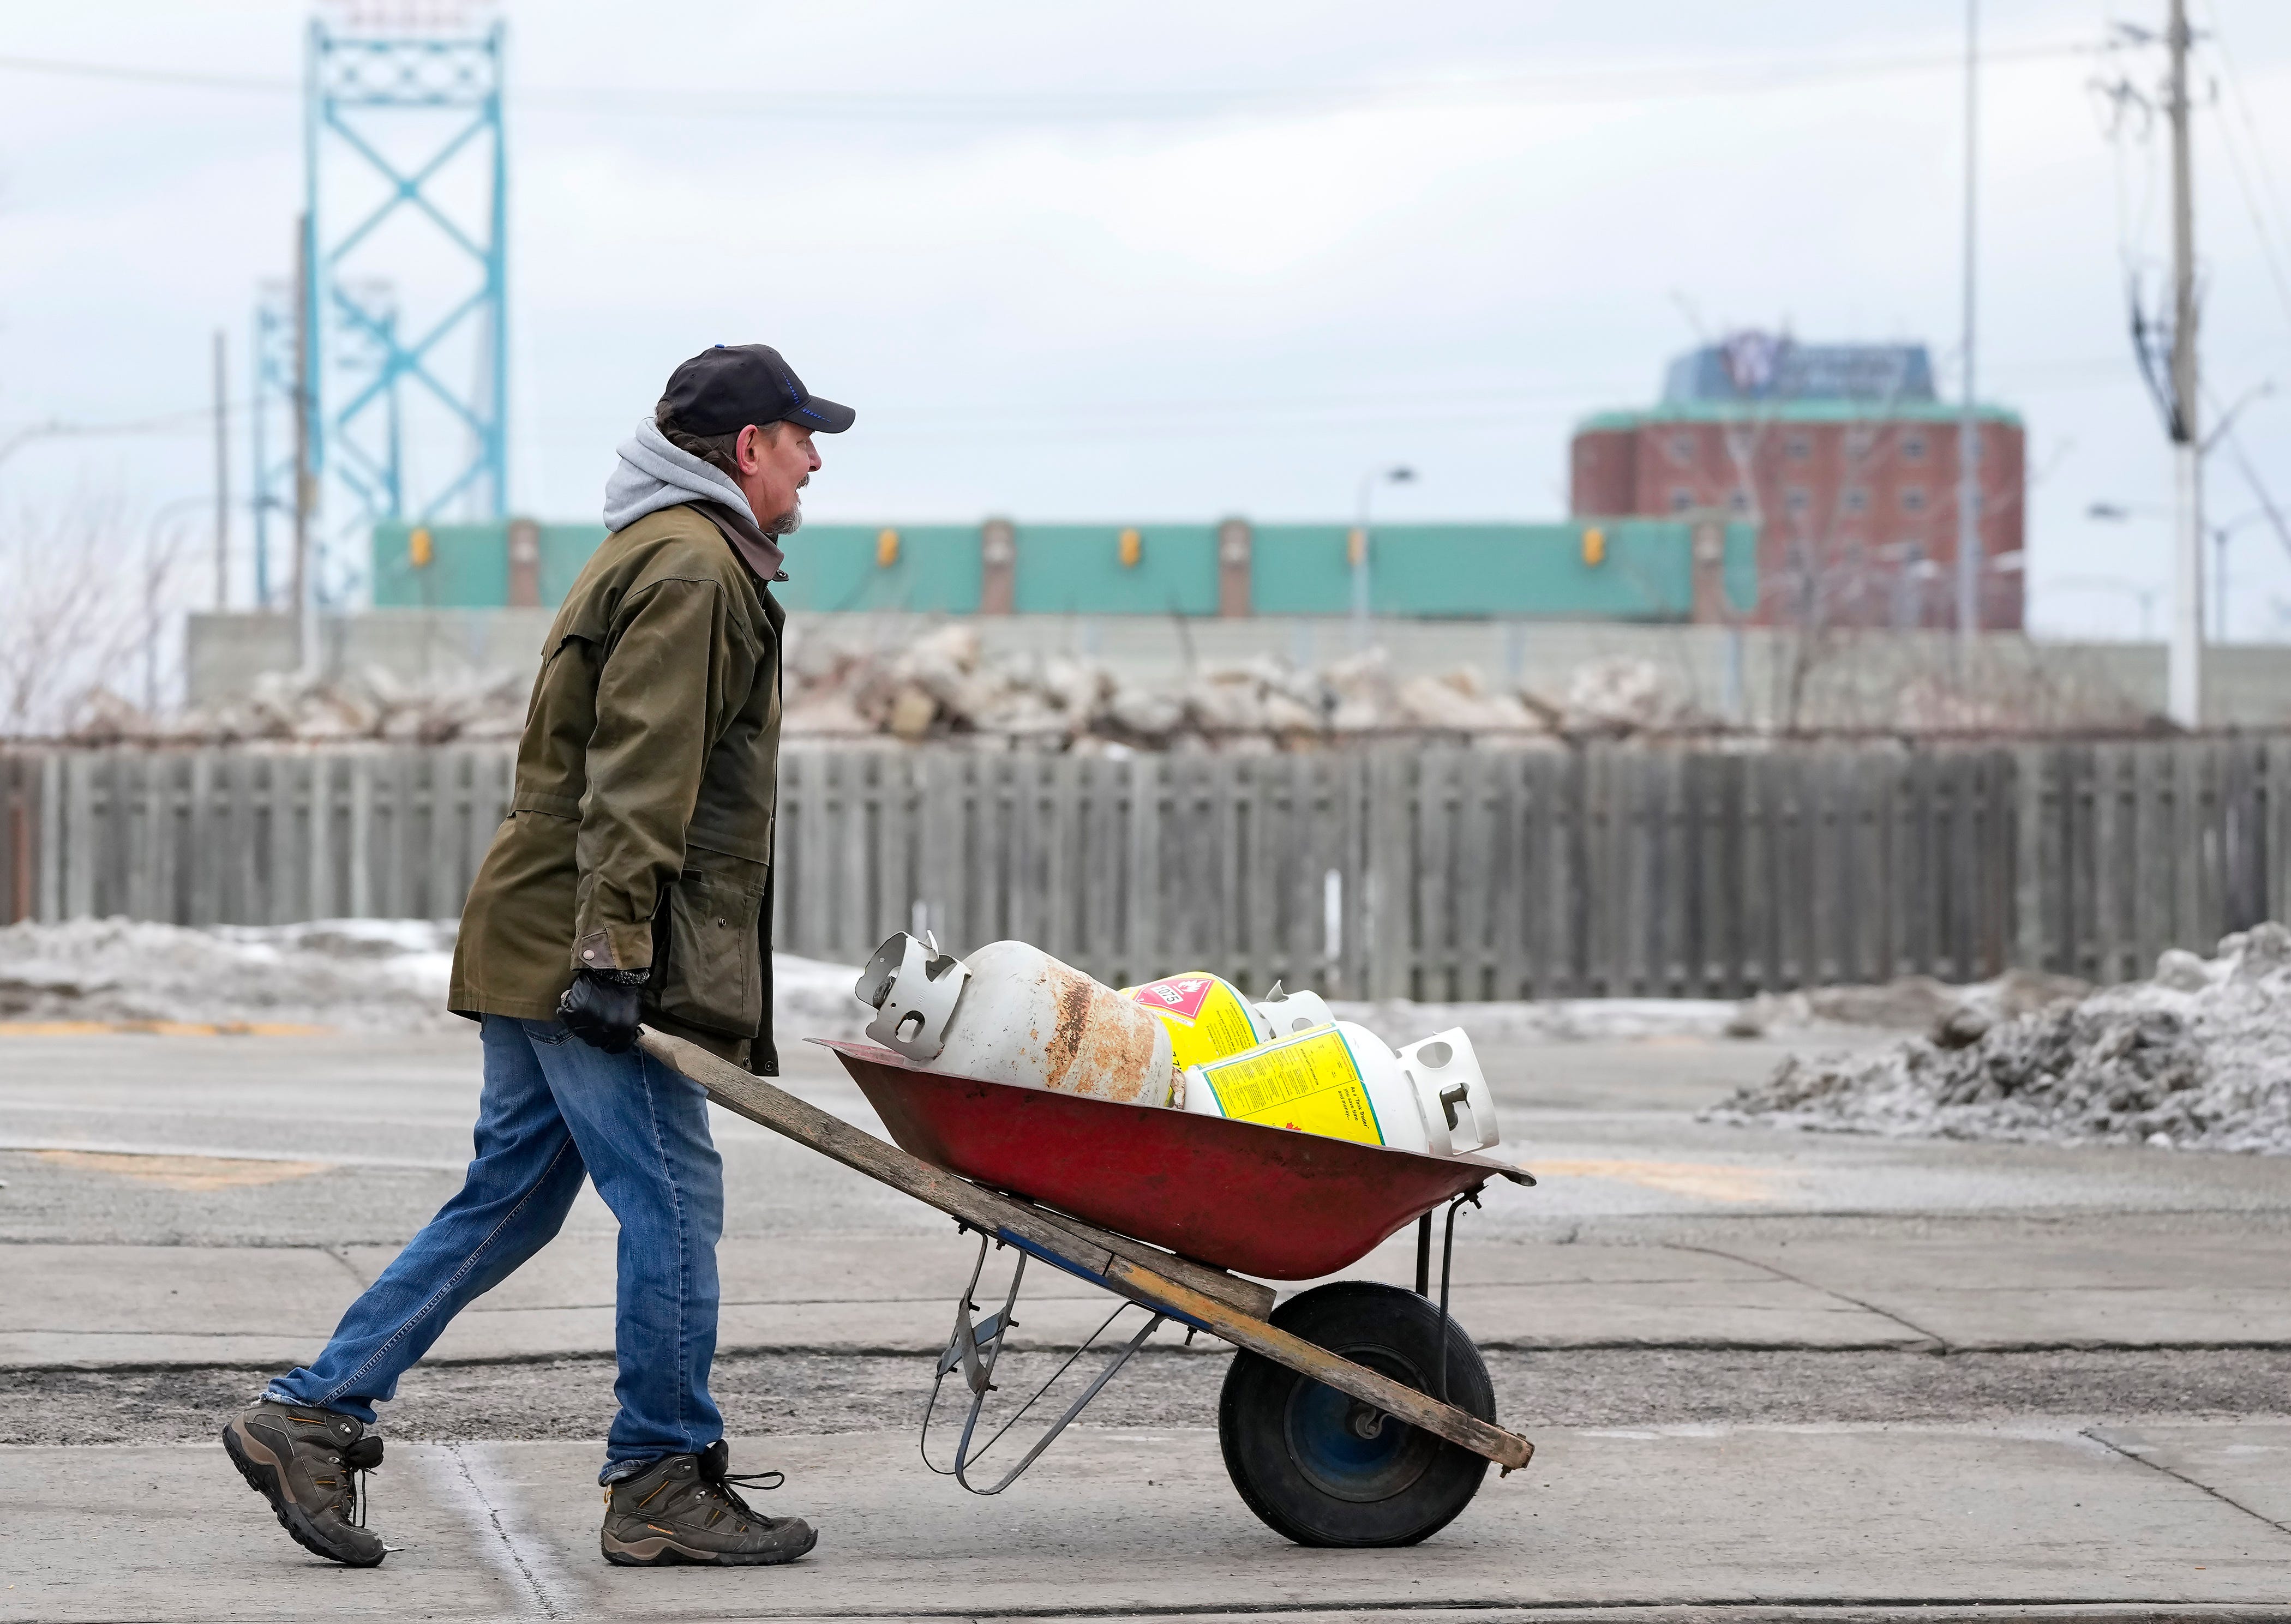 Truckers and supporters carry propane tanks past police to where they are blocking the access leading from the Ambassador Bridge, linking Detroit and Windsor, as truckers and their supporters continue to protest against the COVID-19 vaccine mandates and restrictions, in Windsor, Ontario, Thursday, Feb. 10, 2022.